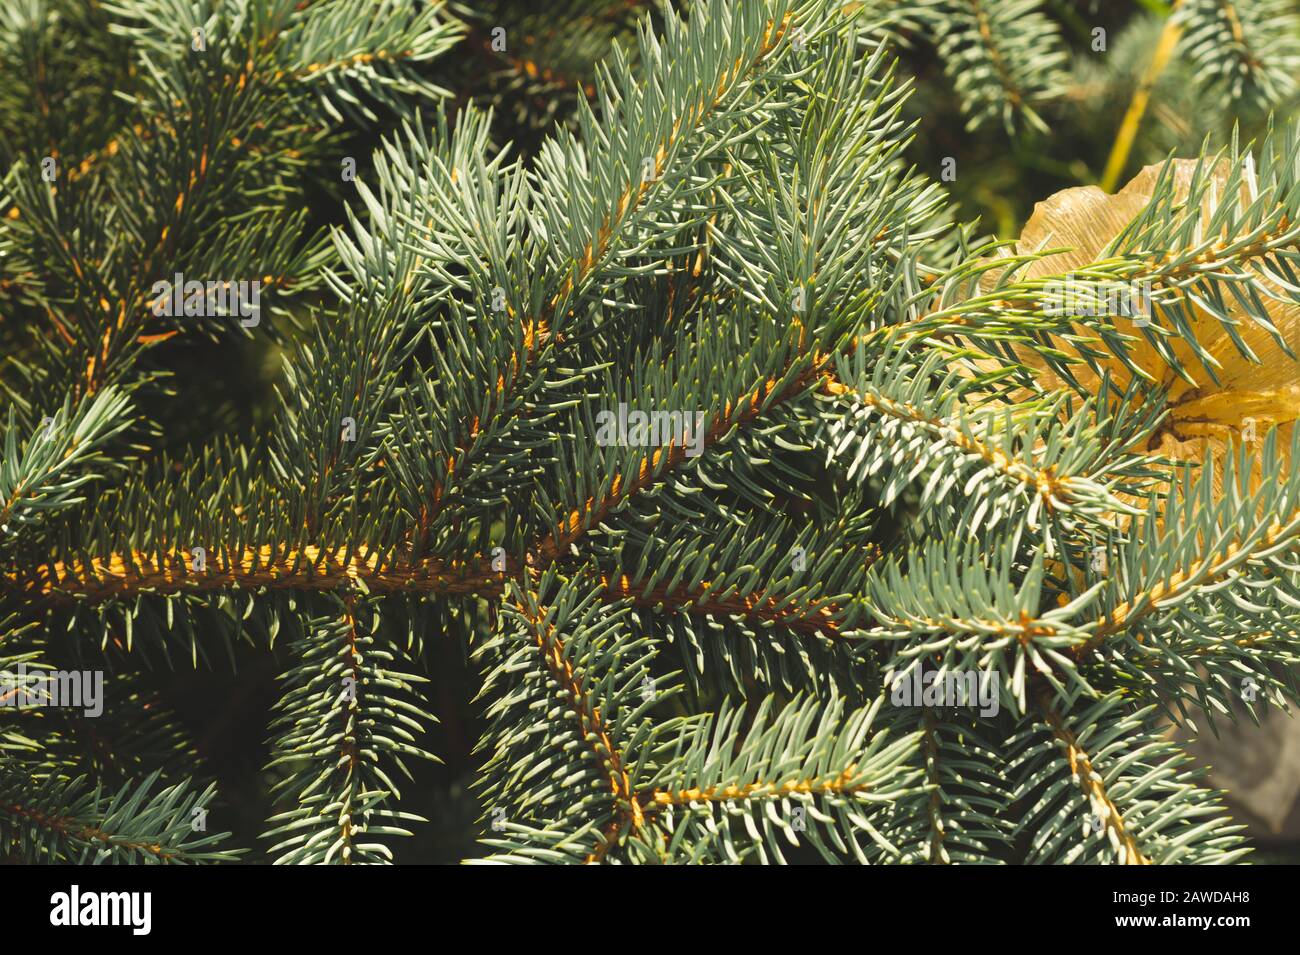 Needles of fir tree branch close up. green pine tree. nature background Stock Photo